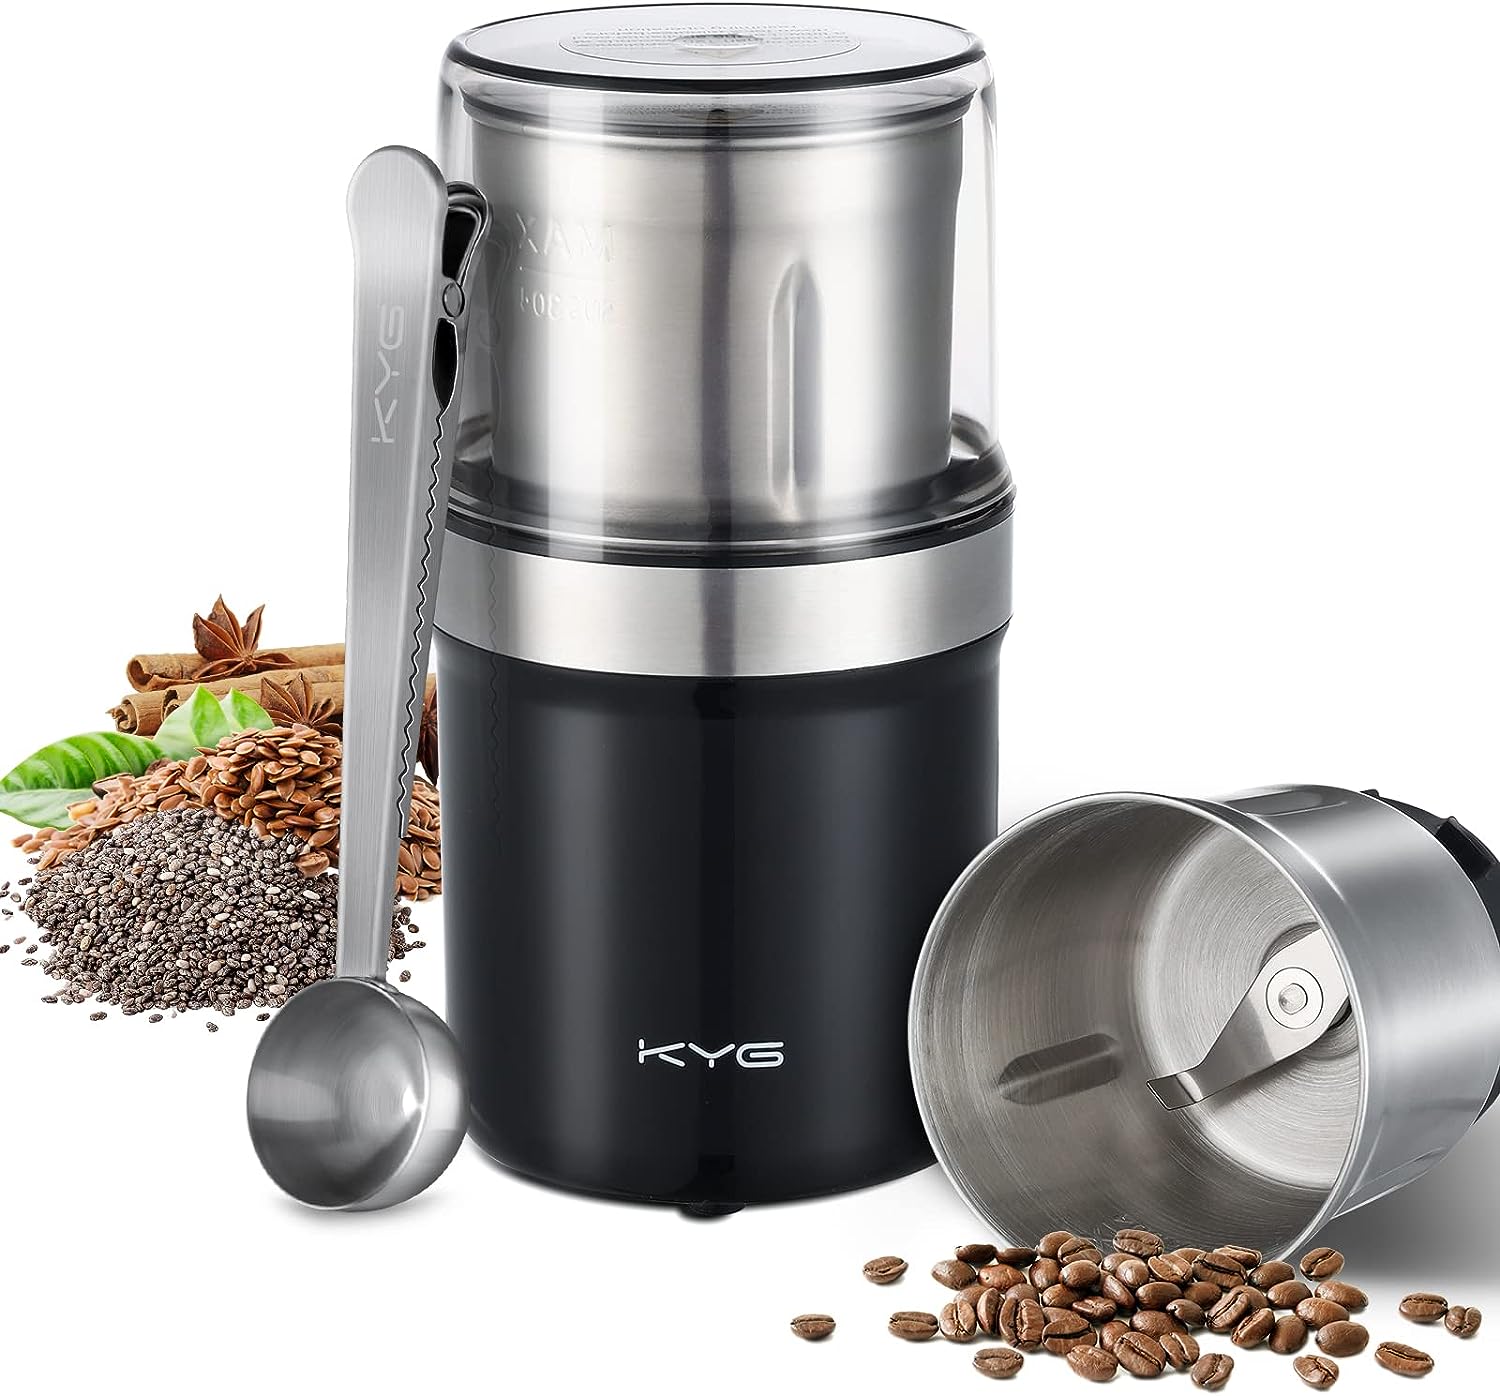 KYG Electric Coffee Grinder with Removable Stainless Steel Container, 300 W Electric Coffee Bean Mill, Spice Mill with 100 g Capacity, for Coffee Beans, Herbs, Nuts, Grains